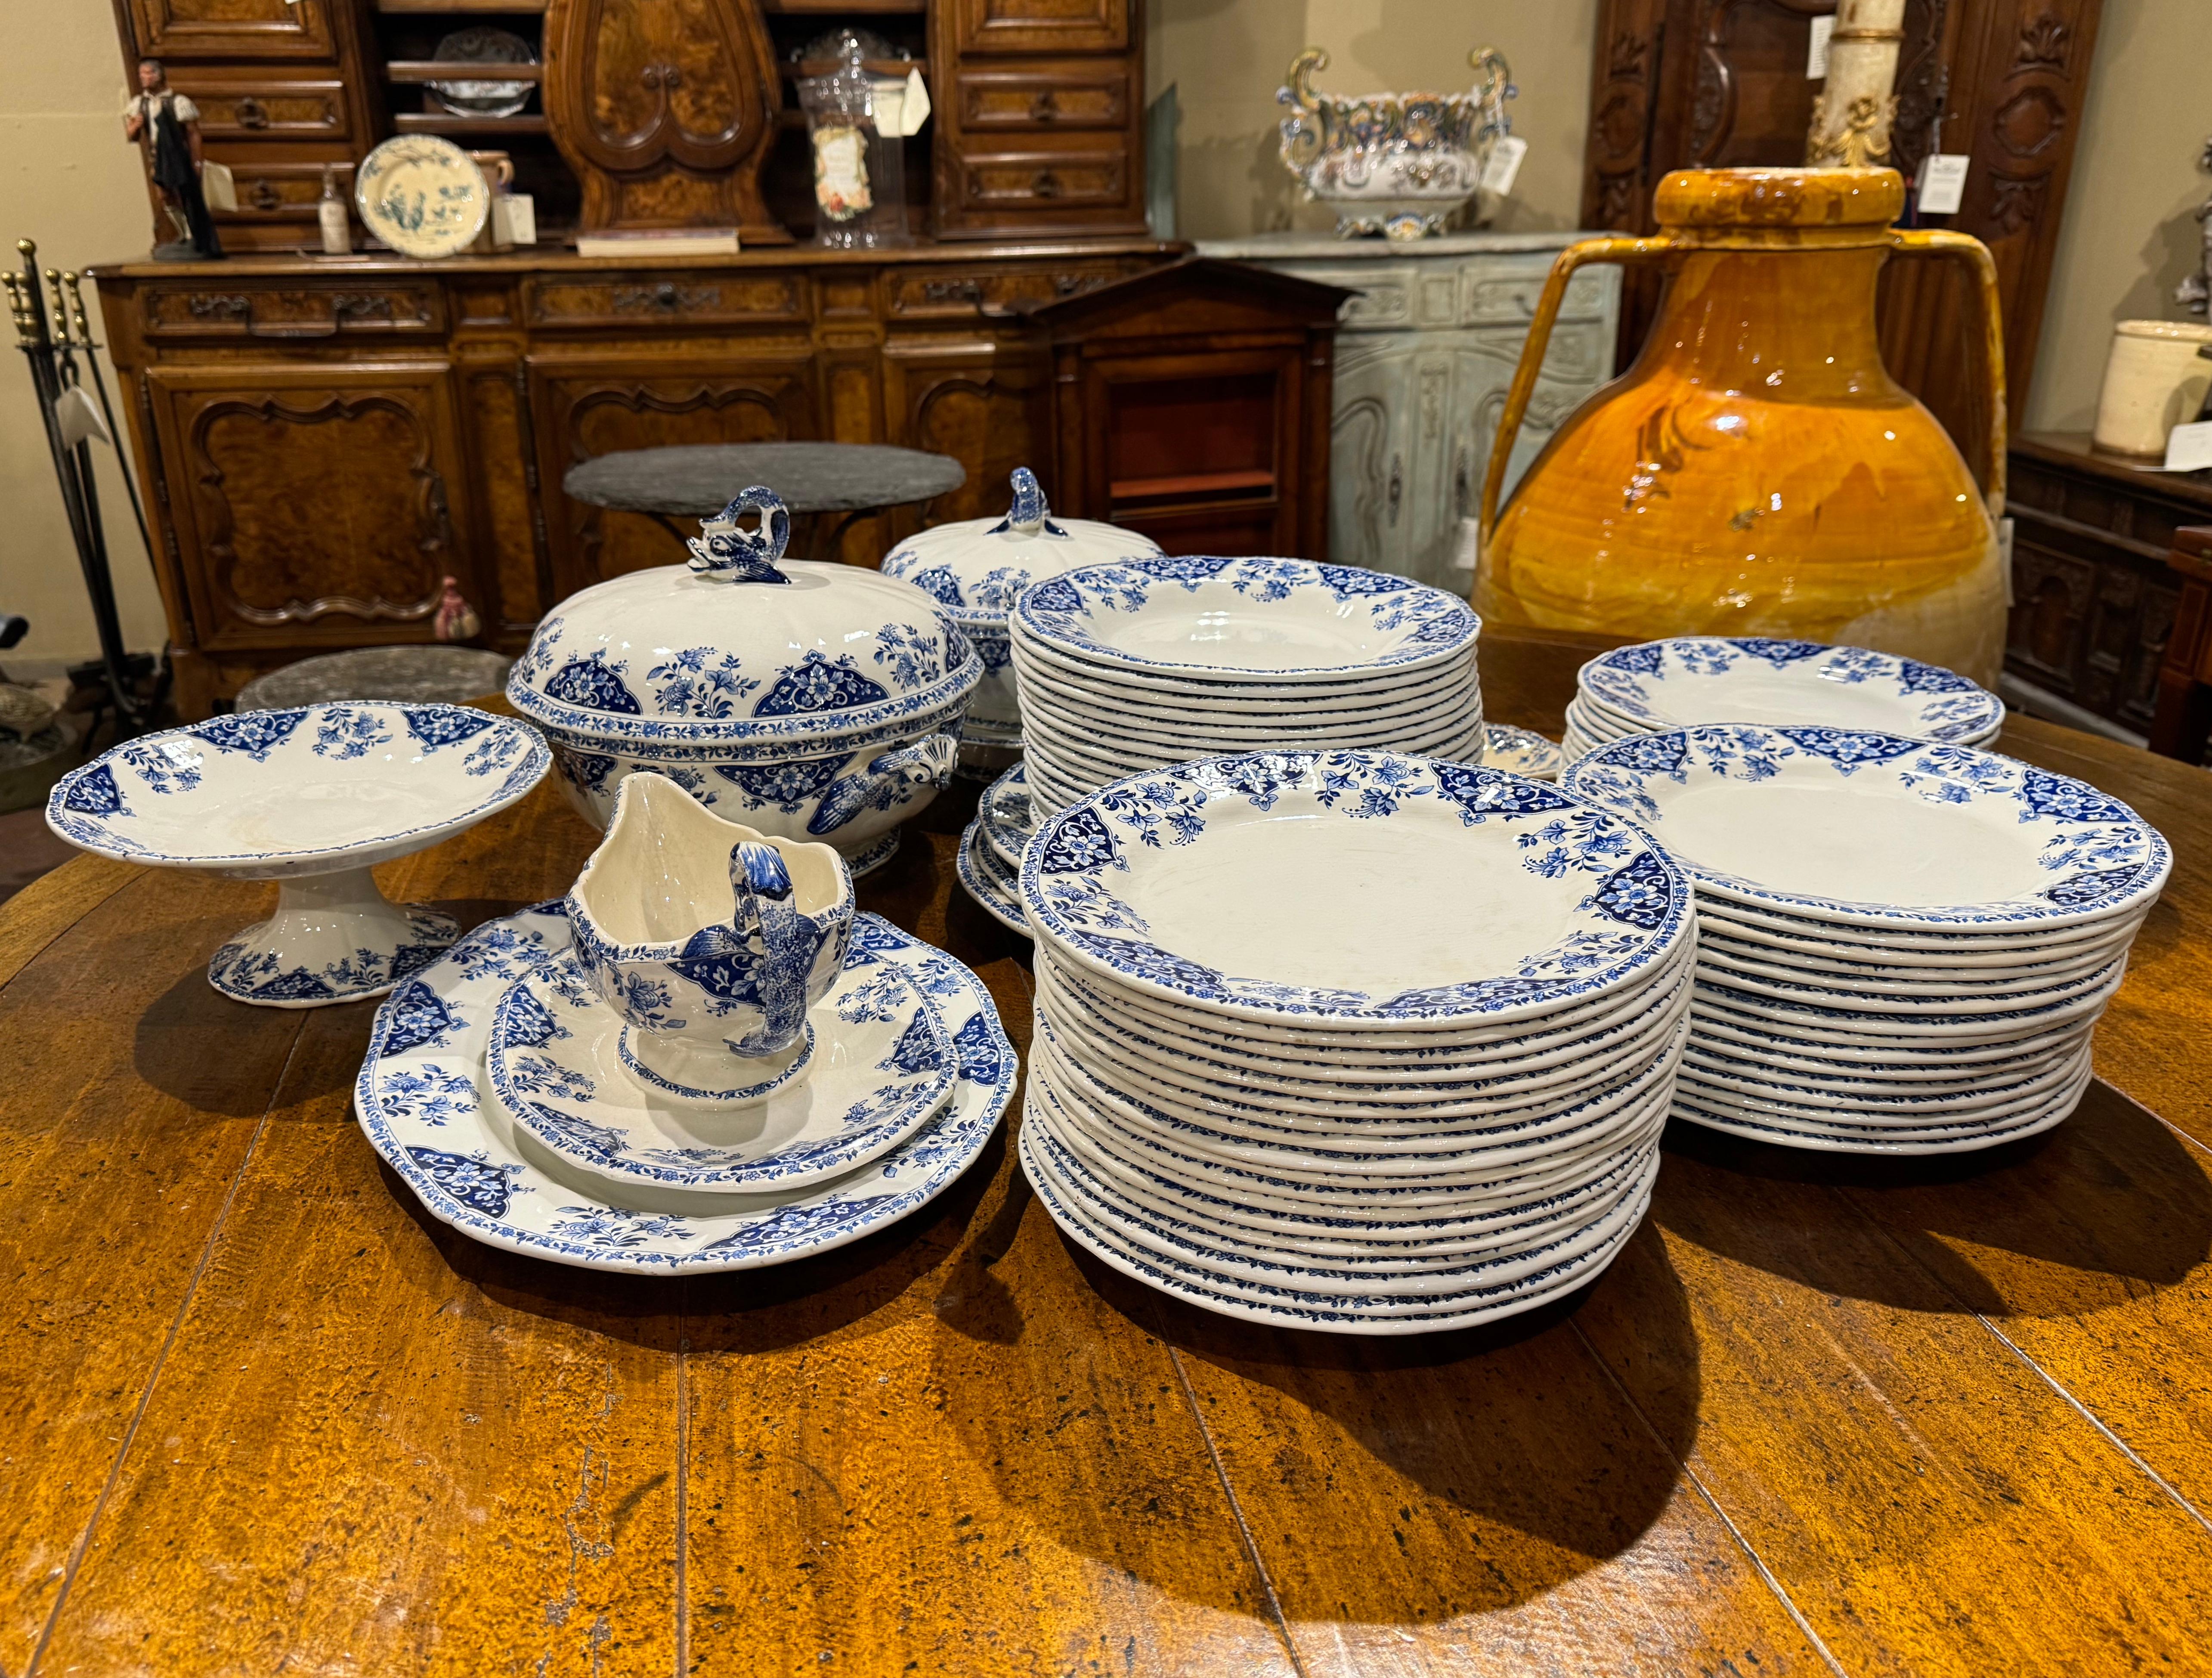 Decorate a dining table or shelving with this antique porcelain service set of 77 pieces. Crafted in France circa 1880 by Gien, each plate and dish with foliate and floral motifs, is stamped on the bottom 